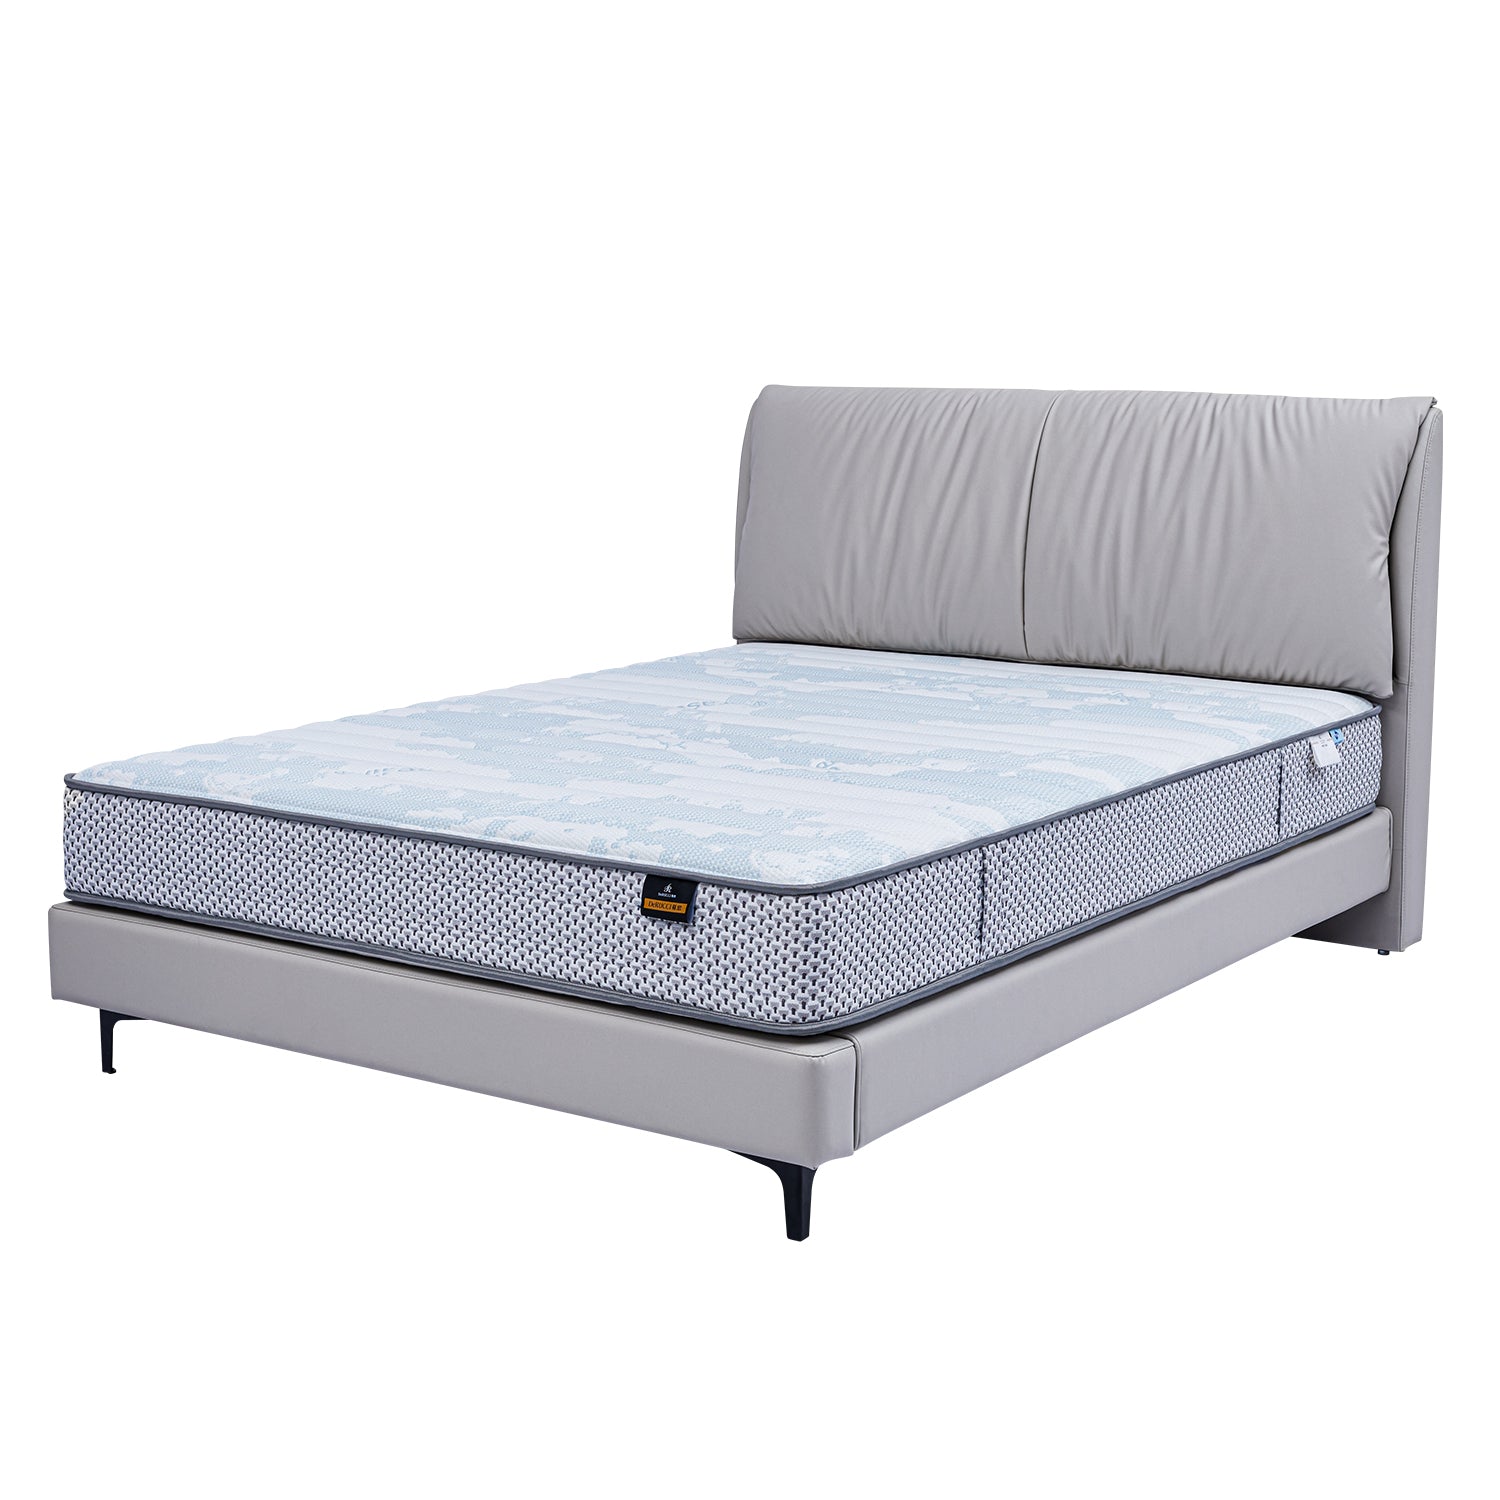 DeRUCCI Bed Frame BOC1 - 012 with gray upholstered headboard and frame, featuring modern and sleek design, shown with a mattress on top